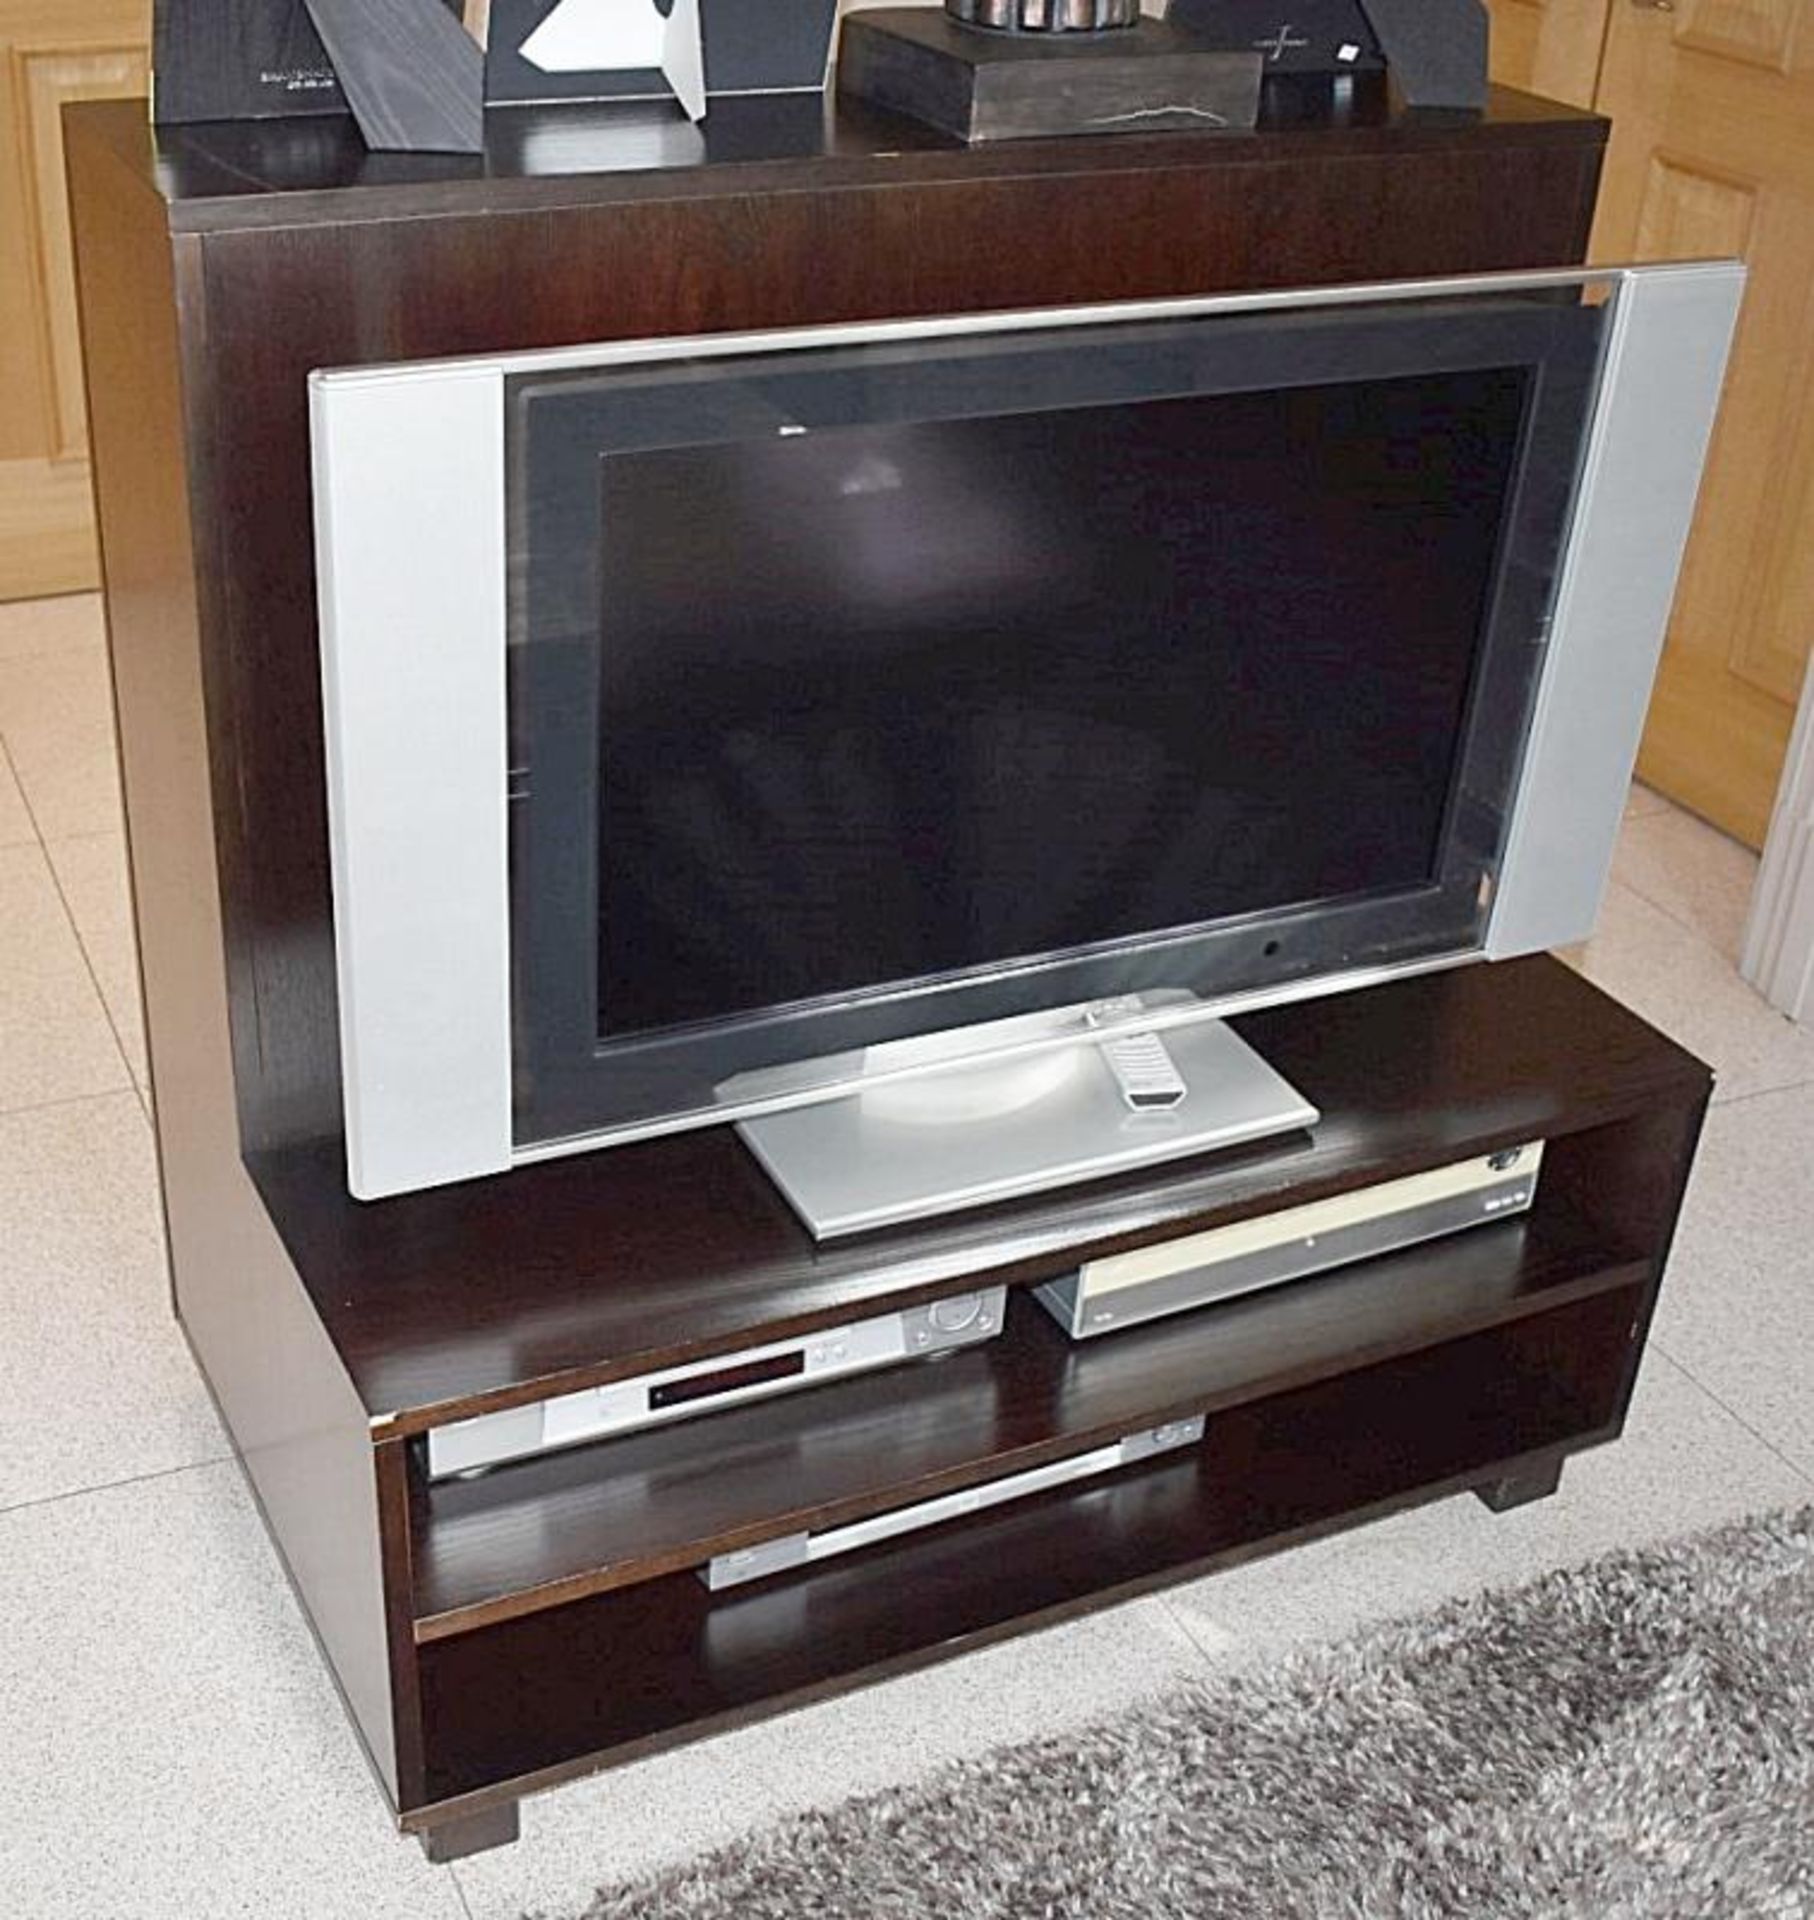 1 x TV Unit With 2-Door Cabinet Storage To The Rear - Dimensions: W105 x D64 x H108cm - Ref: ABR044